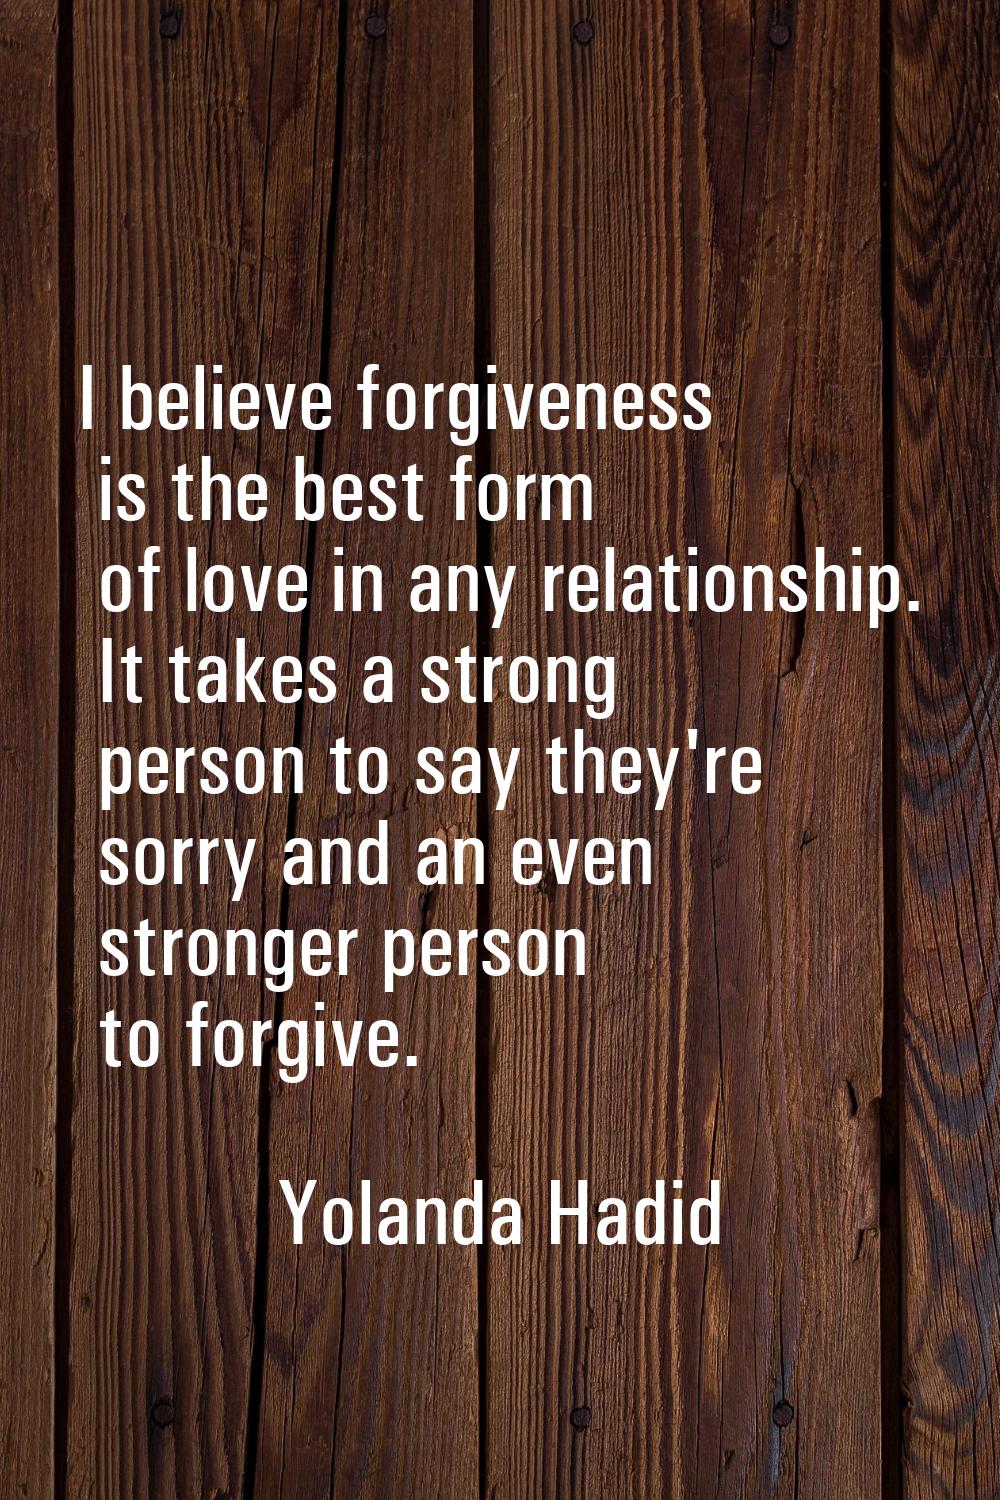 I believe forgiveness is the best form of love in any relationship. It takes a strong person to say